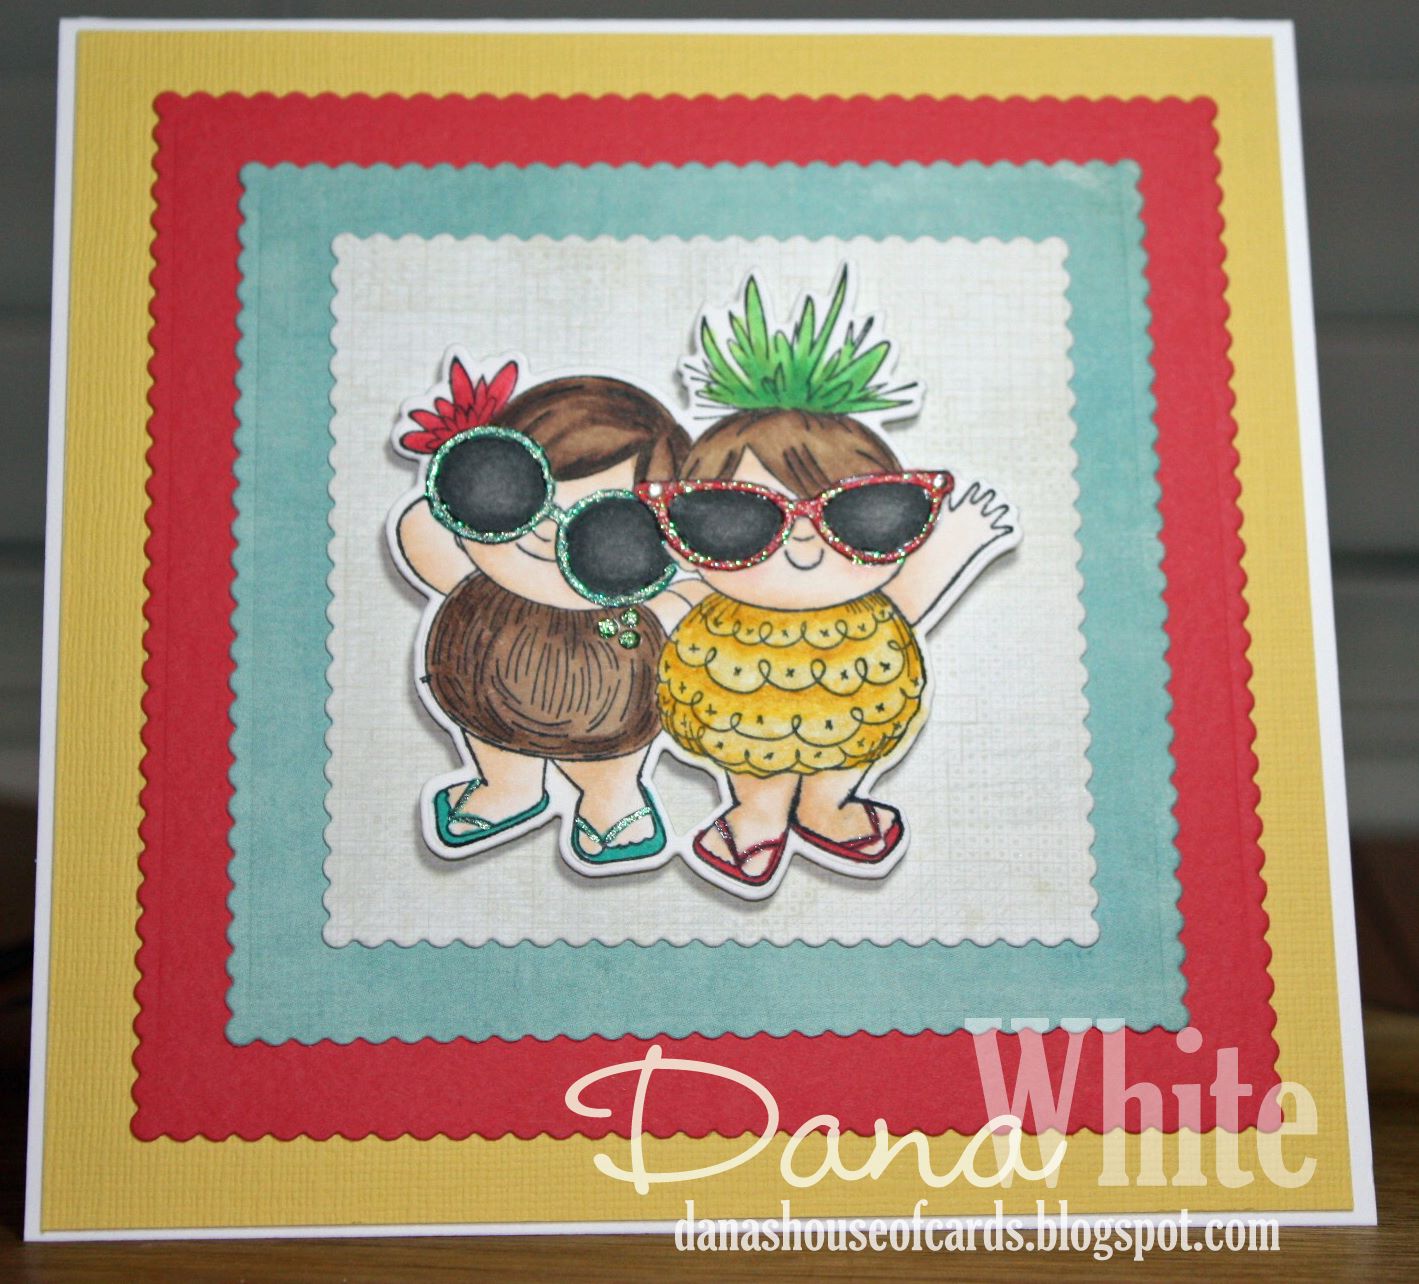 Bellarific Friday challenge with STAMPING BELLA- Card made by Dana White  using our TROPICAL SQUIDGIES rubber stamp